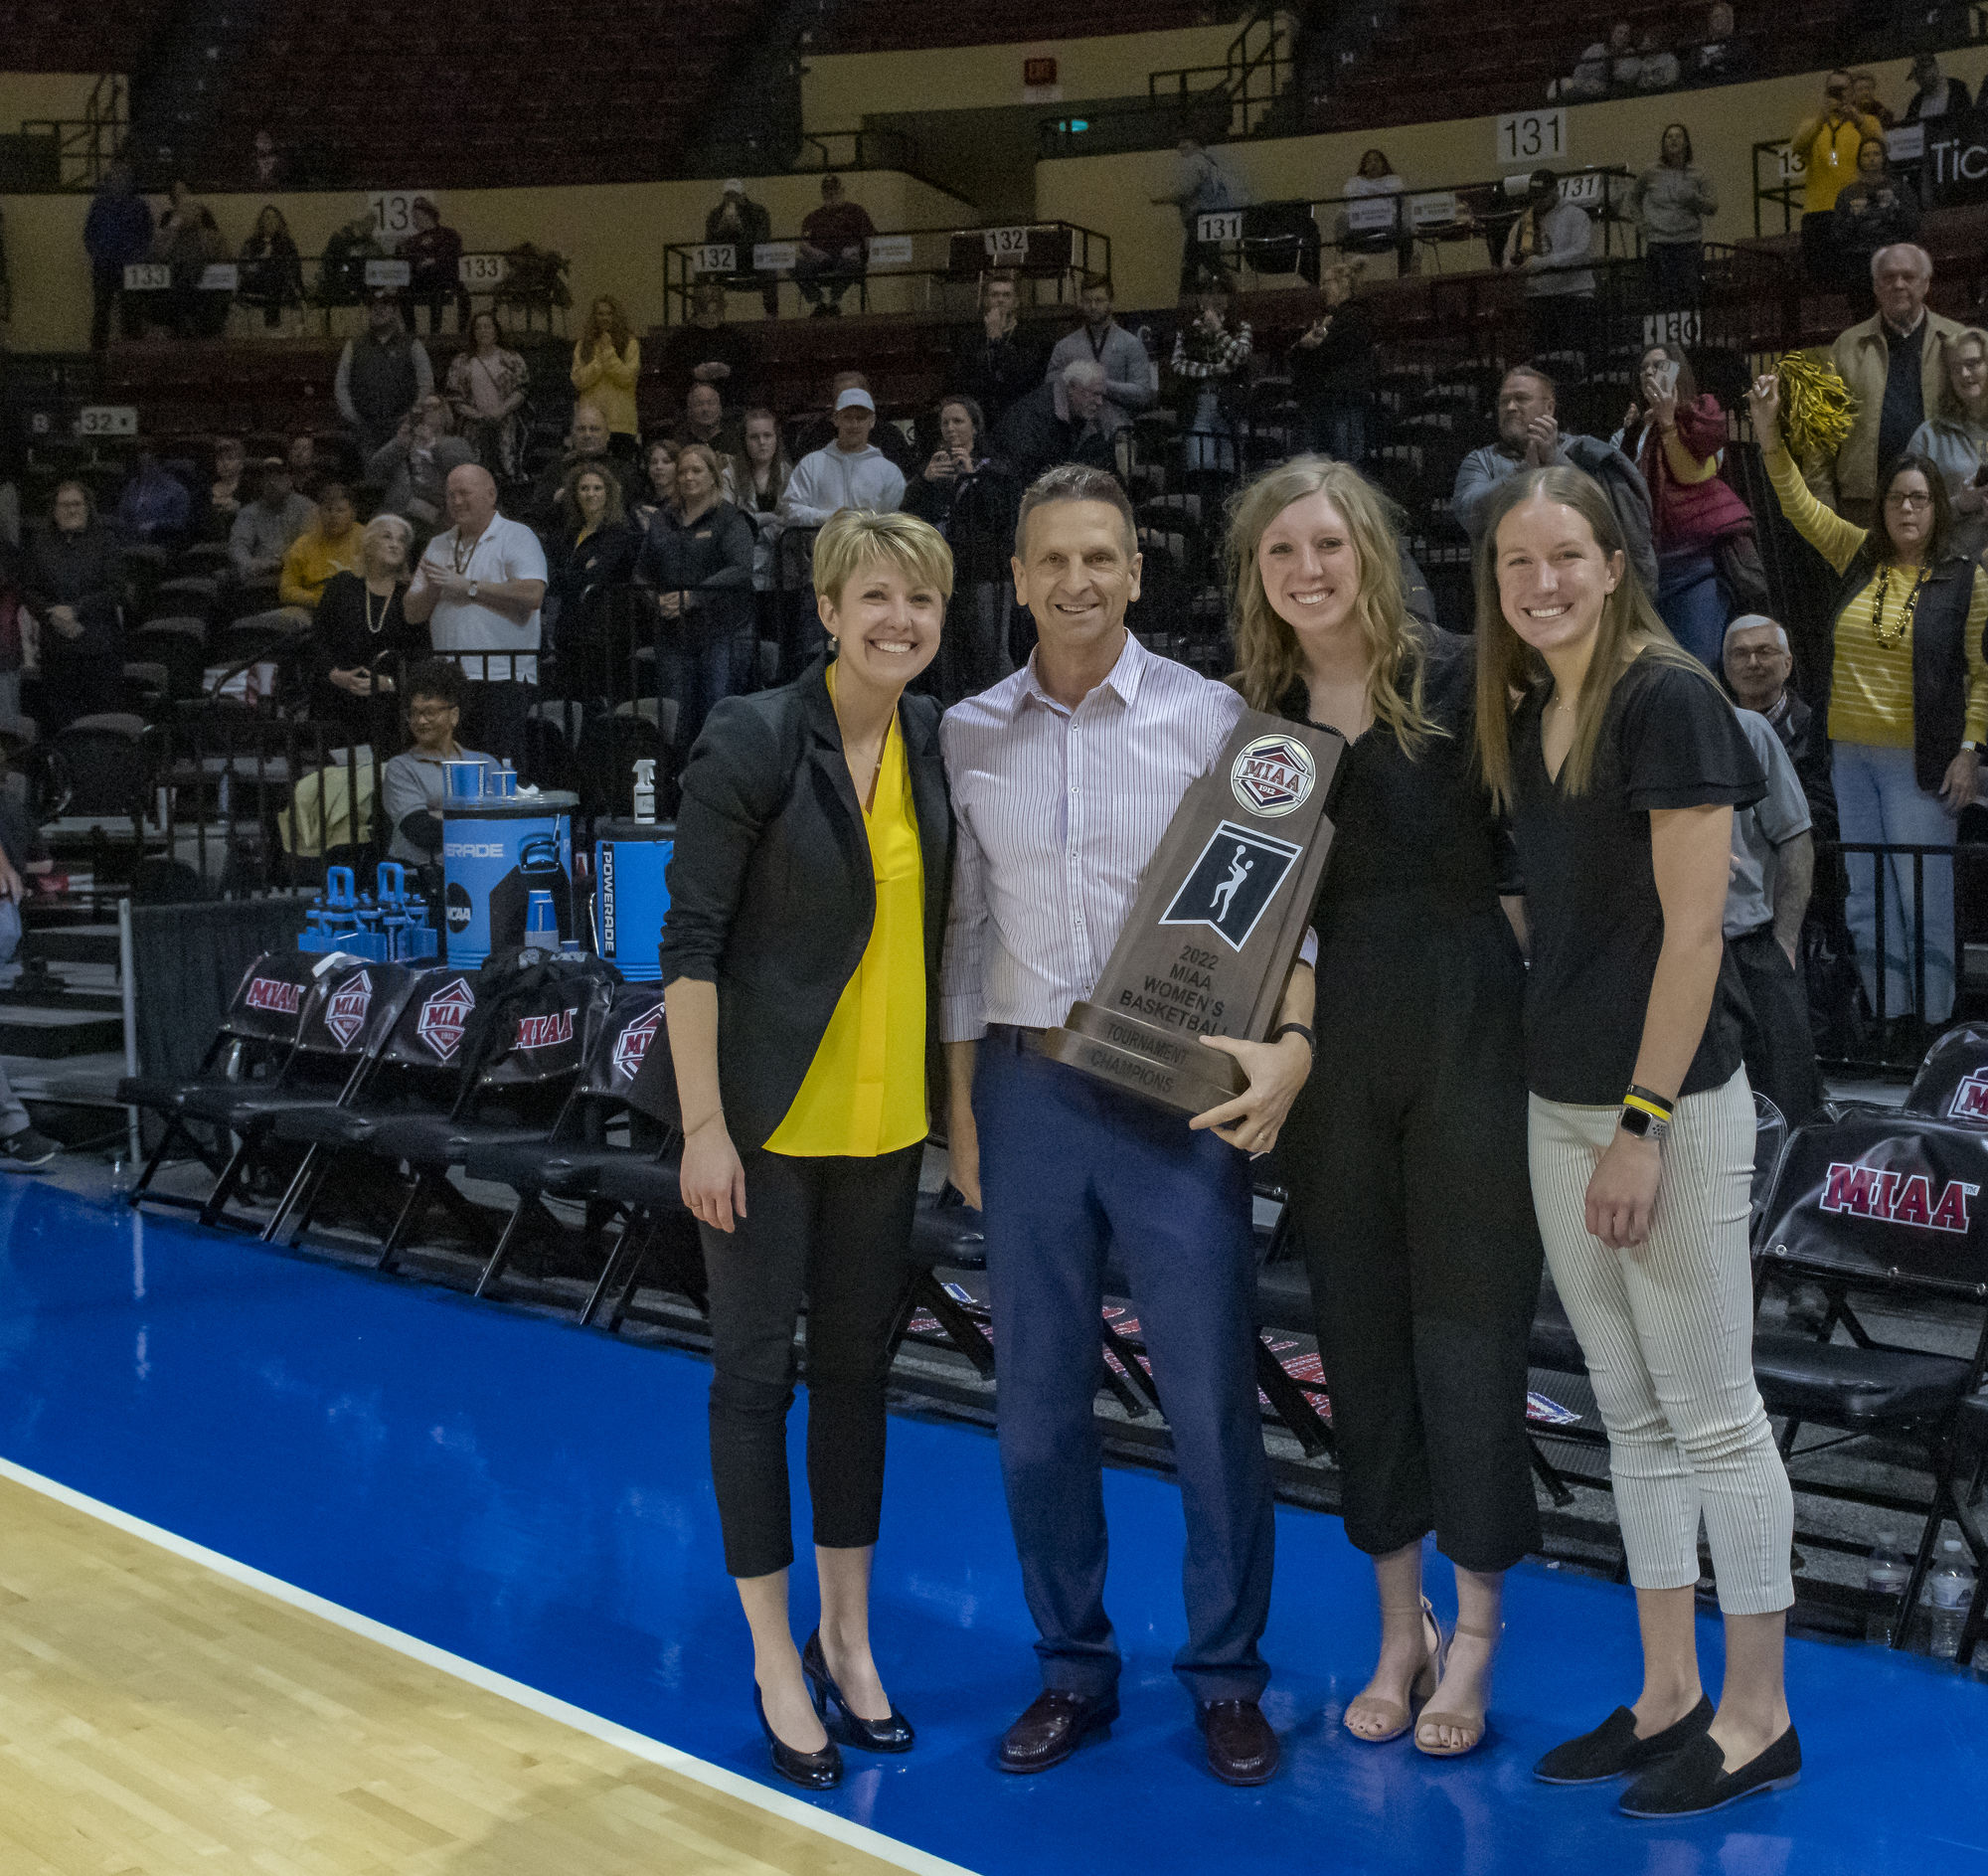 FHSU’s winning coaching staff, from left, are assistant Talia Kahrs, head coach Tony Hobson, assistant Paige Lunsford, and graduate student Kacey Kennett. Photo by Bob Duffy